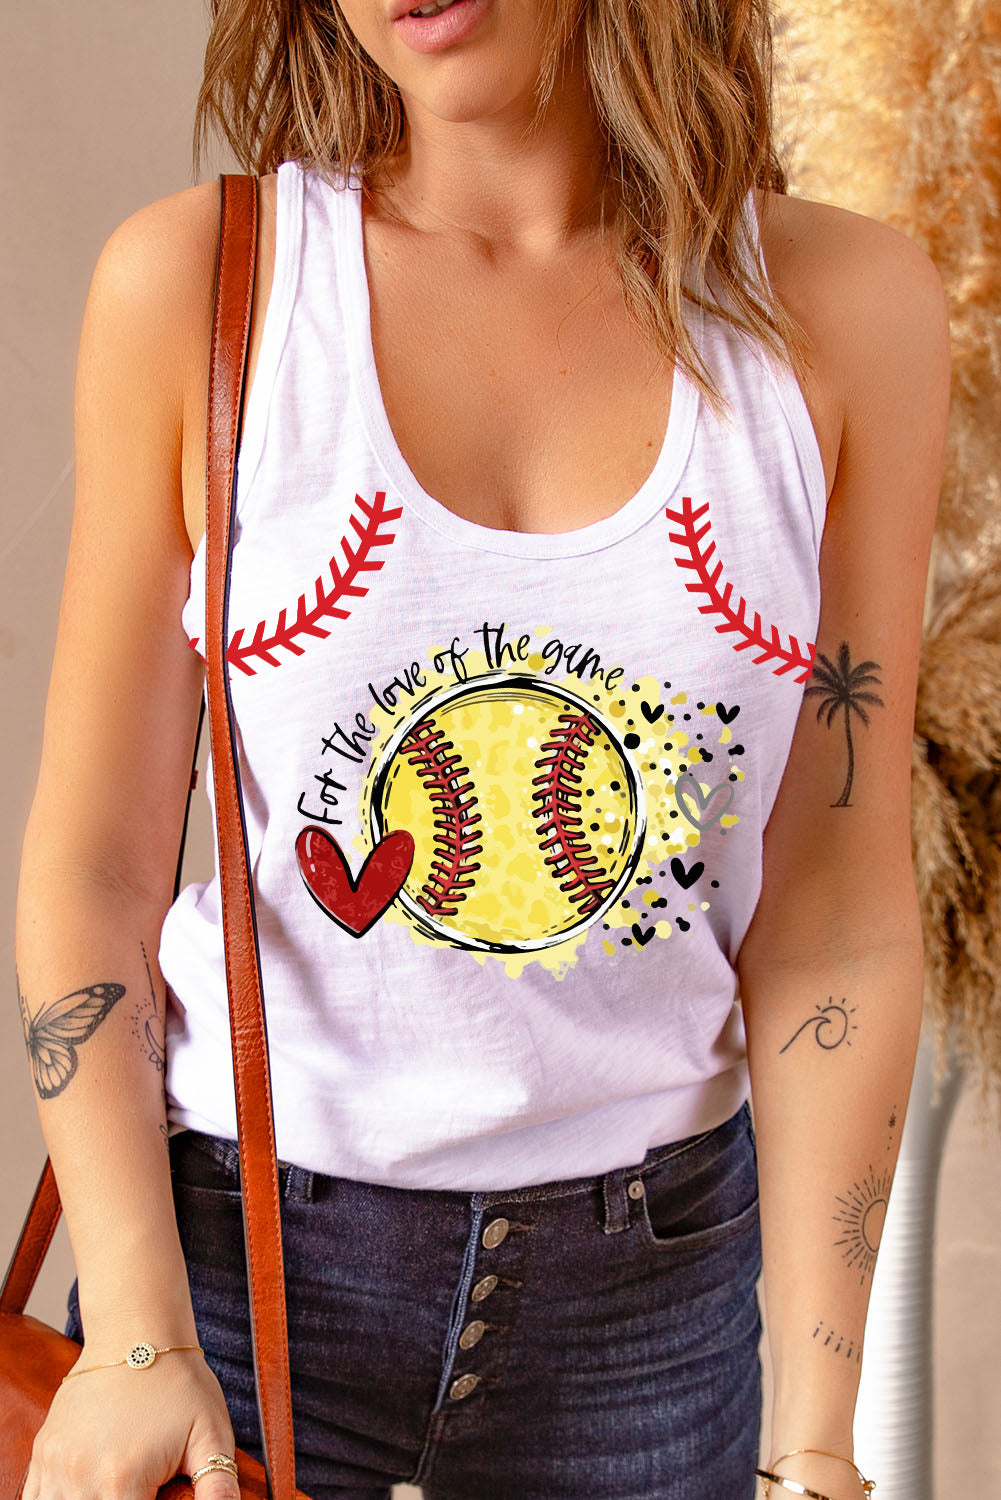 FOR THE LOVE OF THE GAME Tank